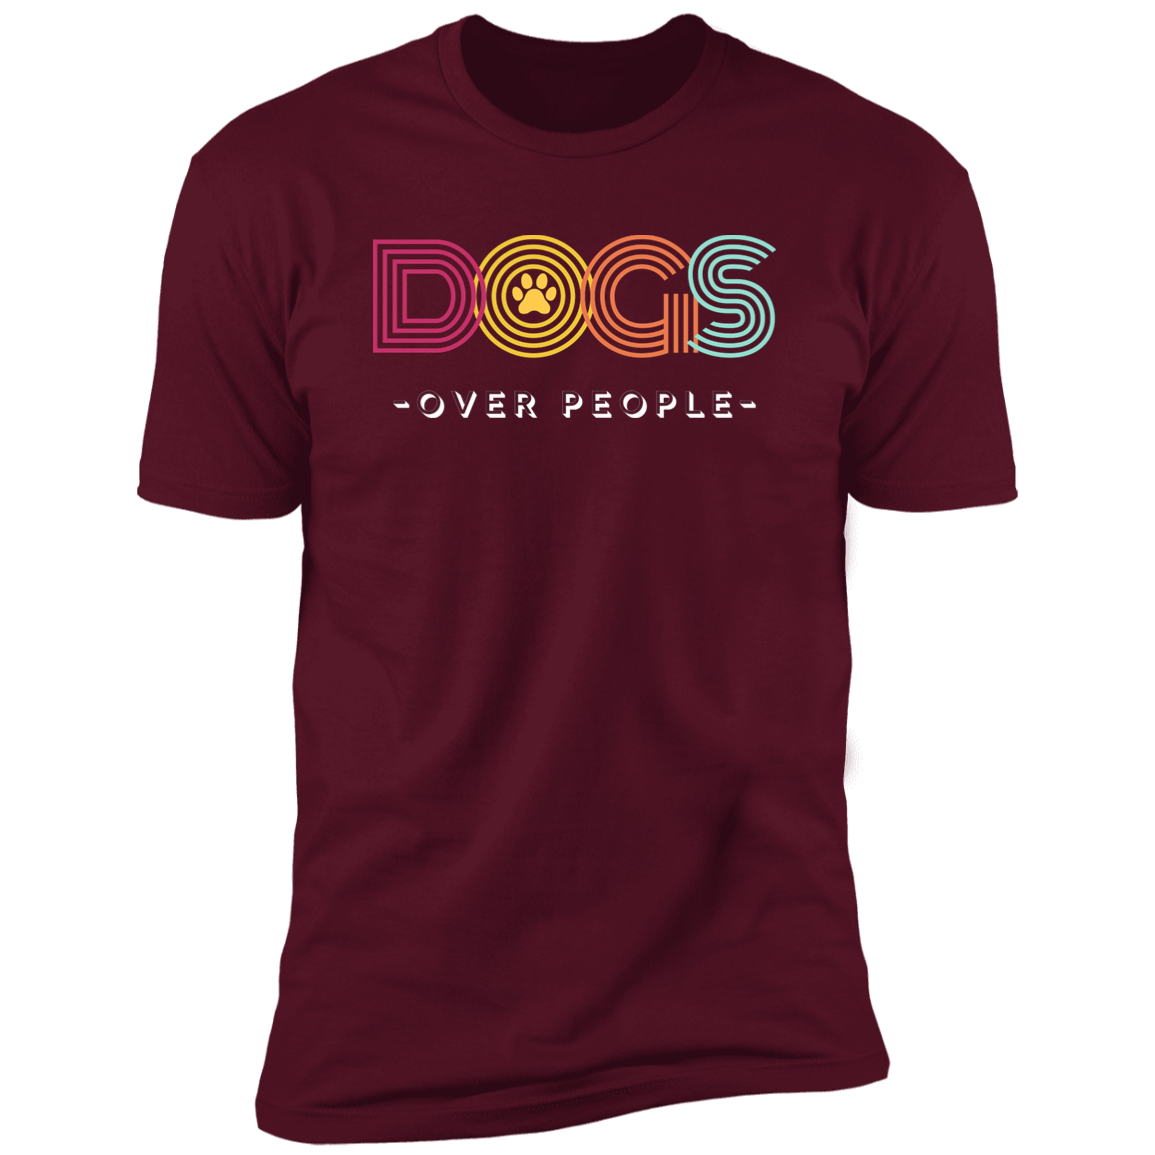 Dogs Over People t-shirt, funny dog shirt for humans, in maroon